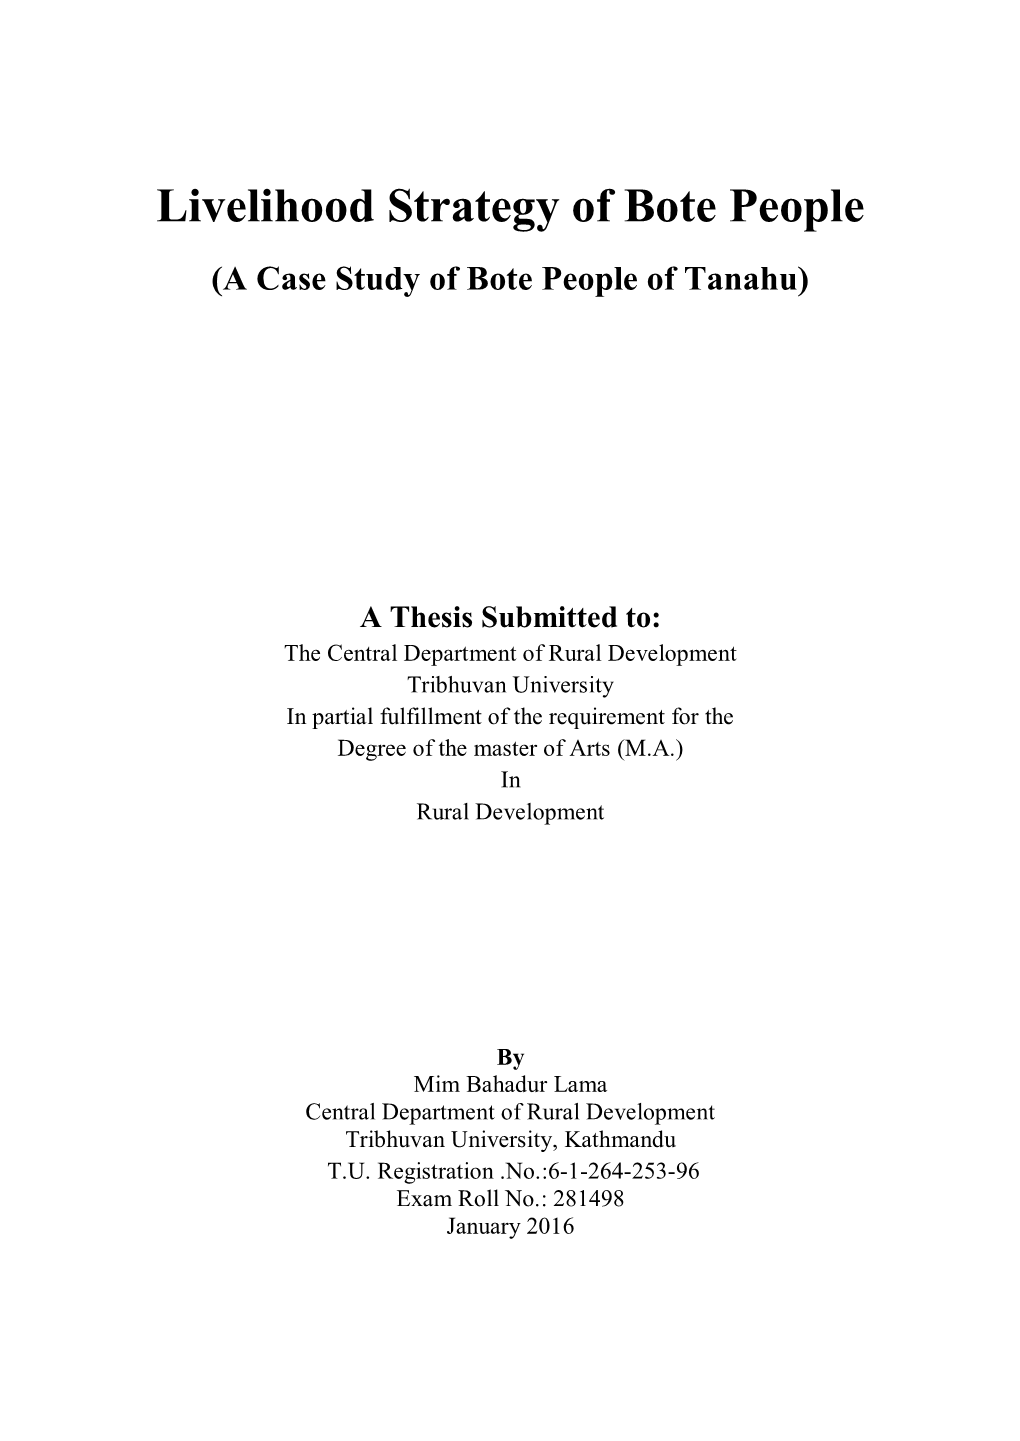 Livelihood Strategy of Bote People (A Case Study of Bote People of Tanahu)